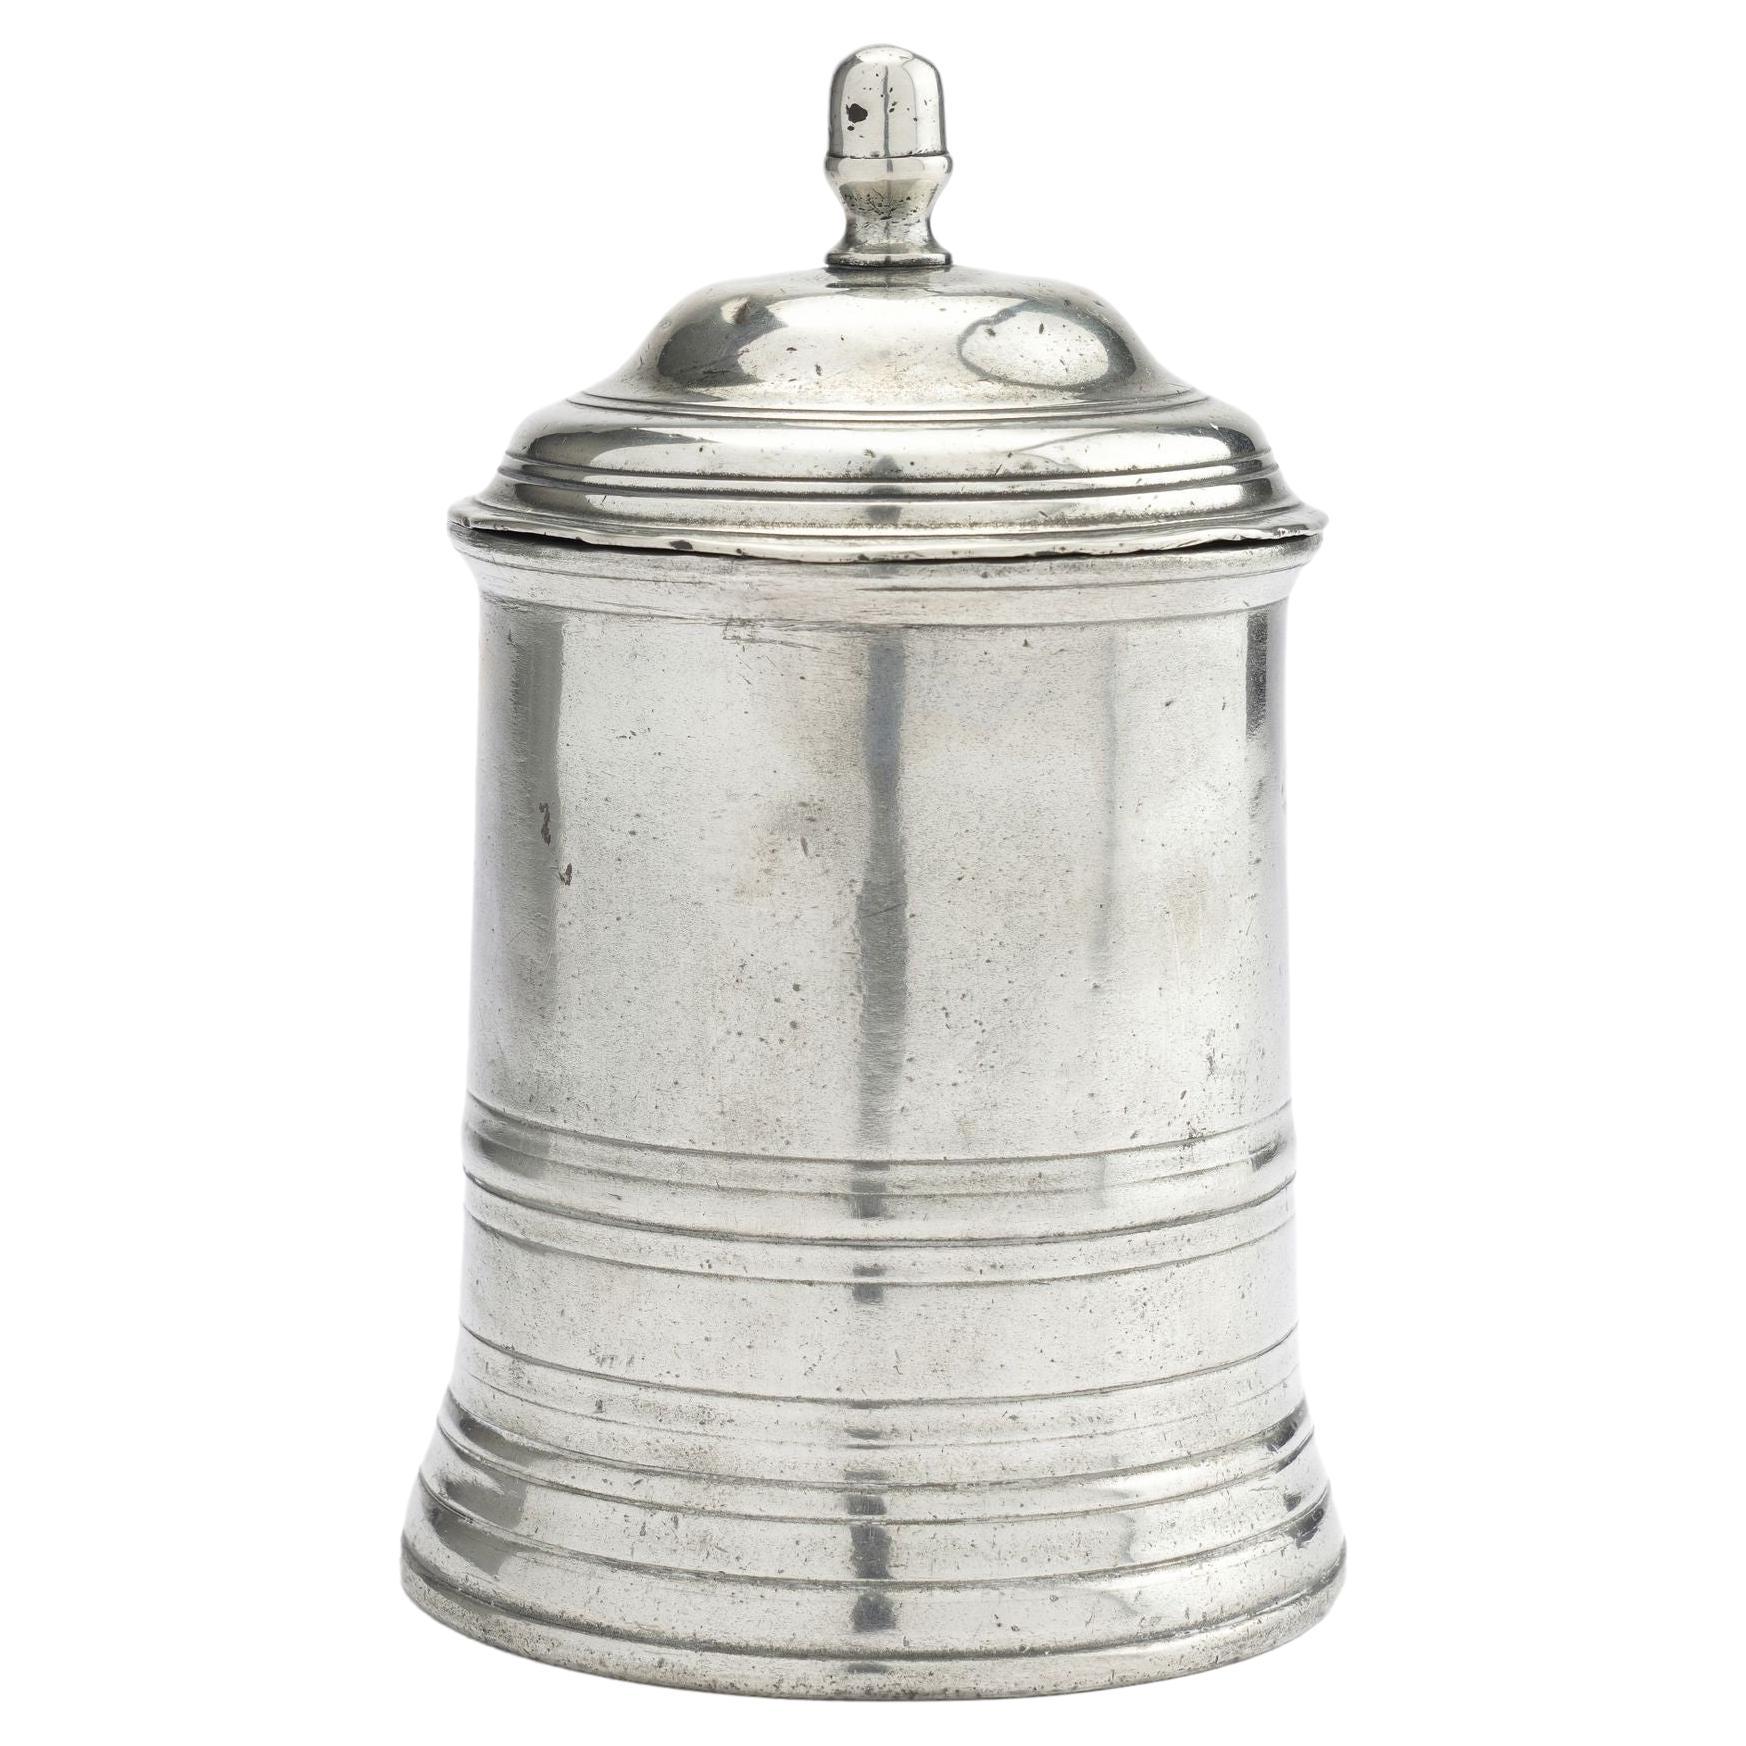 Rare English George III pewter canister with domed lid, 1780-1810